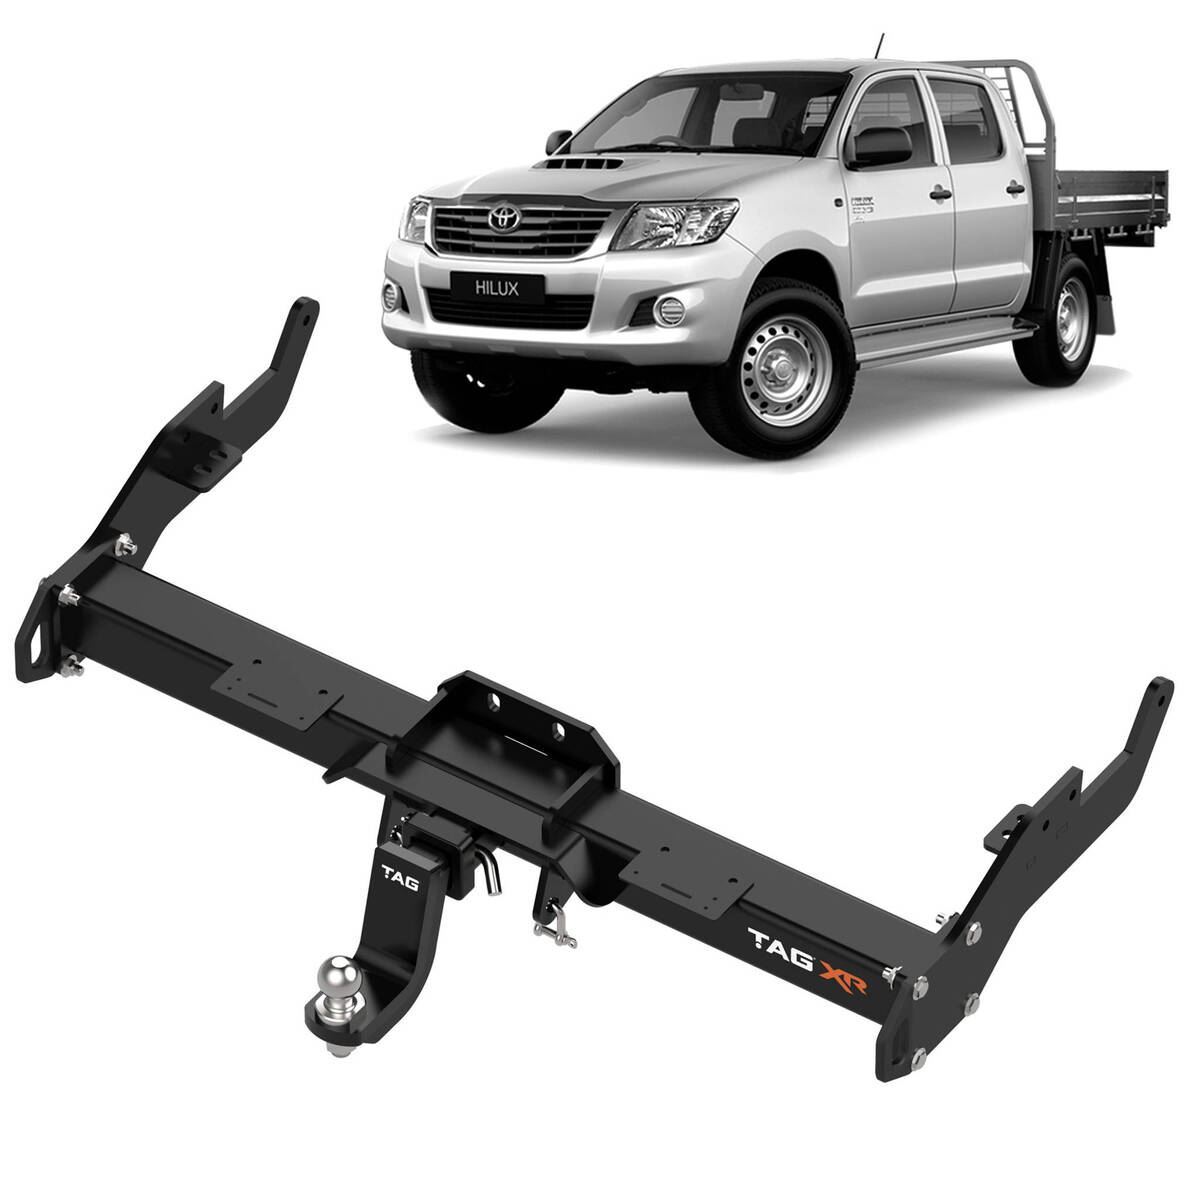 Stainless Steel Hitch Fishing Rod Holder for Truck,Hitch Mount Rod Holder,  4 Link Tube Fishing Rod Holder with Quick Release Pin,Truck Adjustment